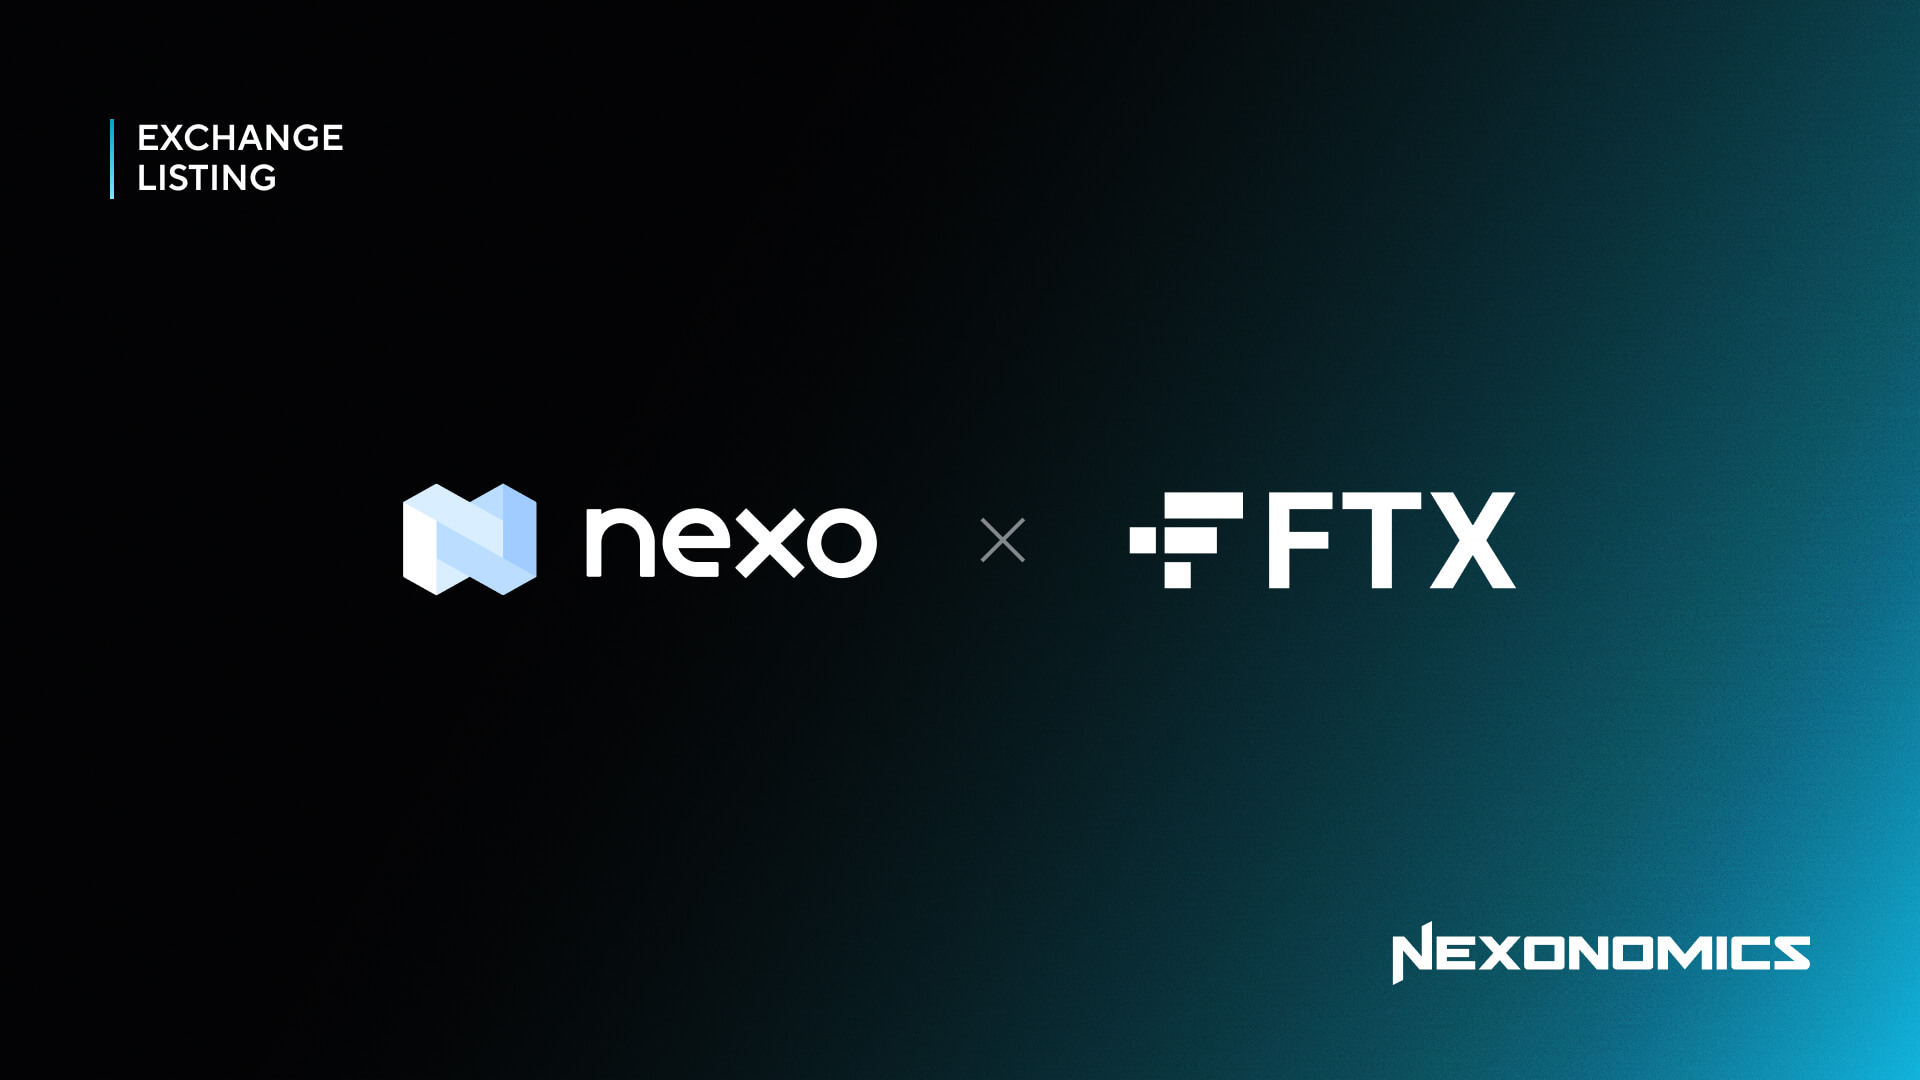 FTX Just Listed the NEXO Token!